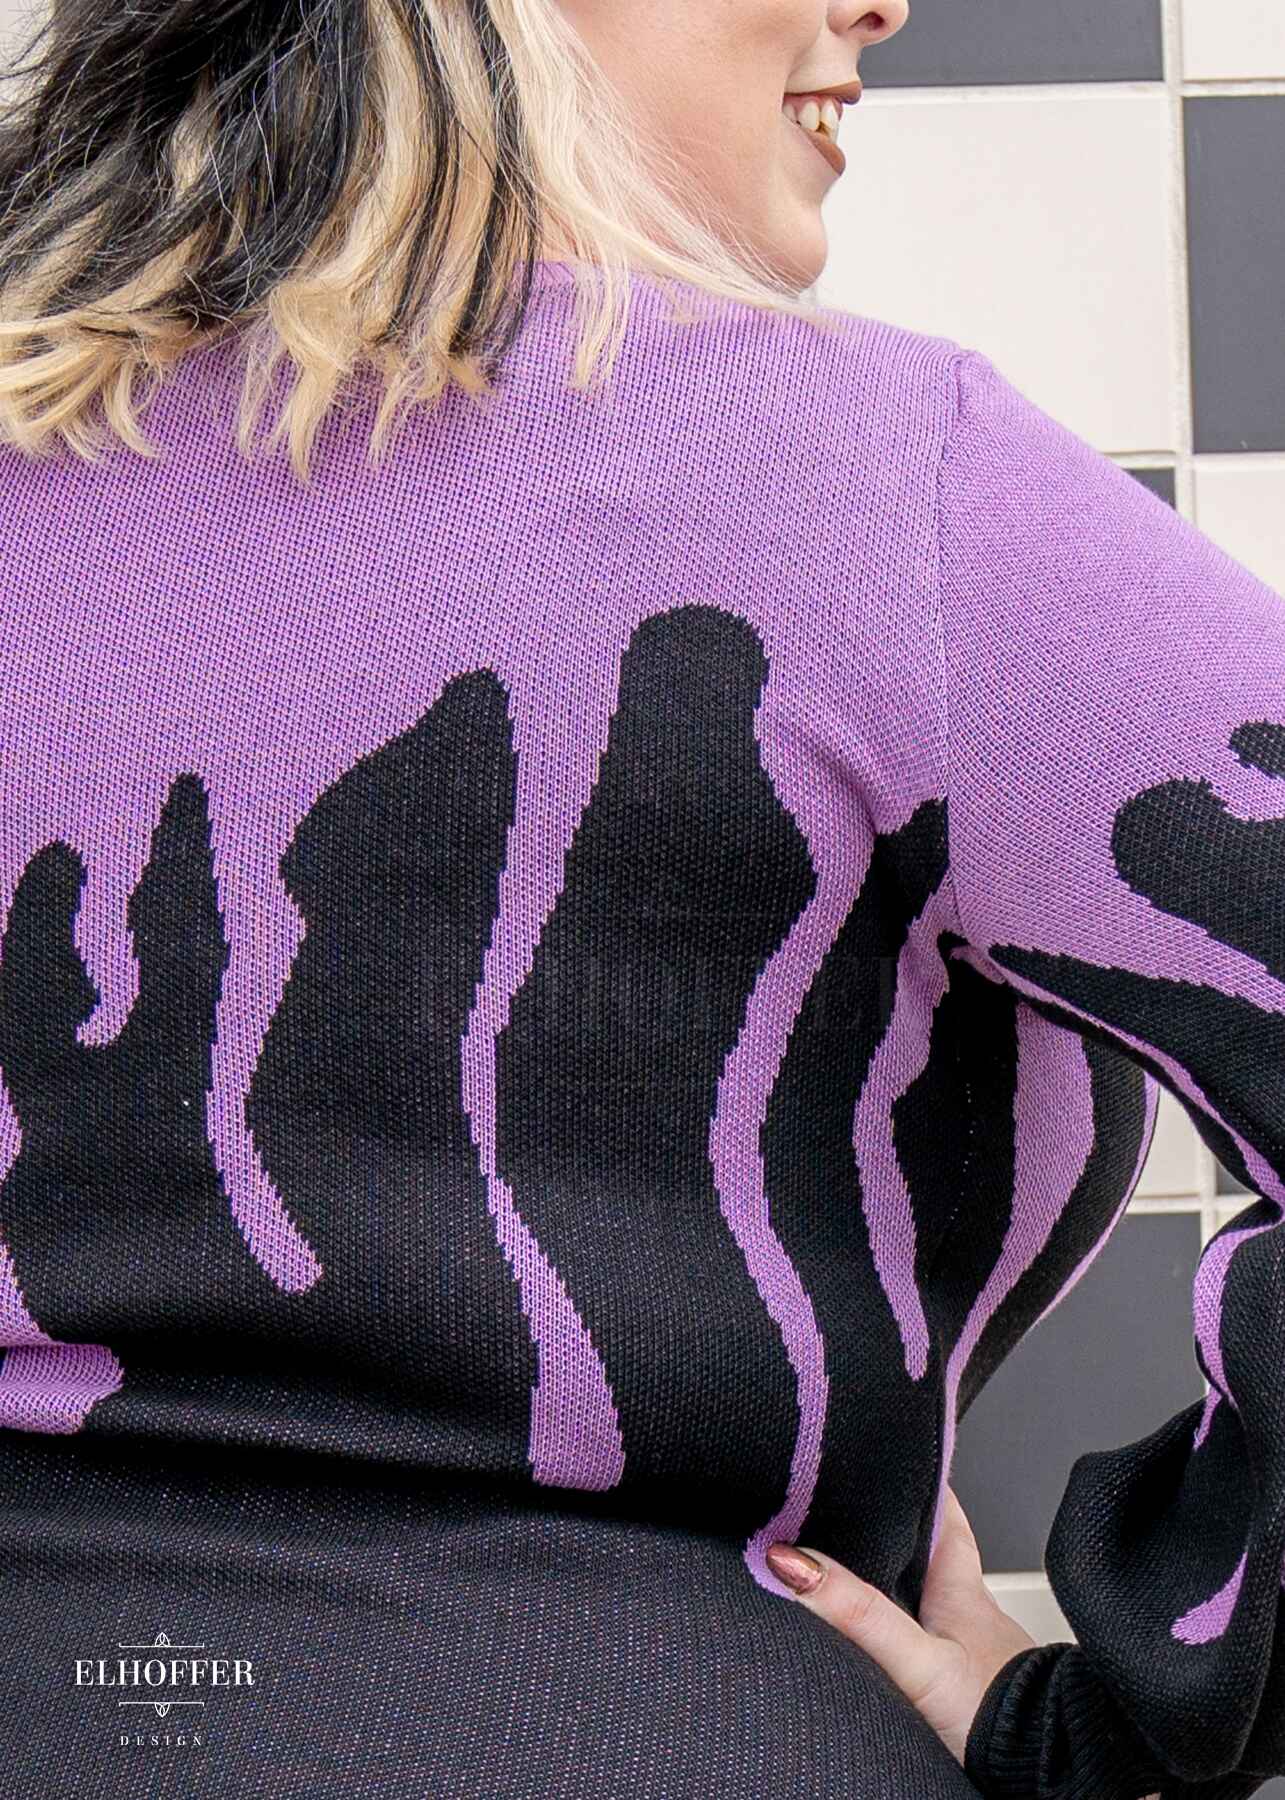 A close up of the lavender purple drip design on the knit sweater